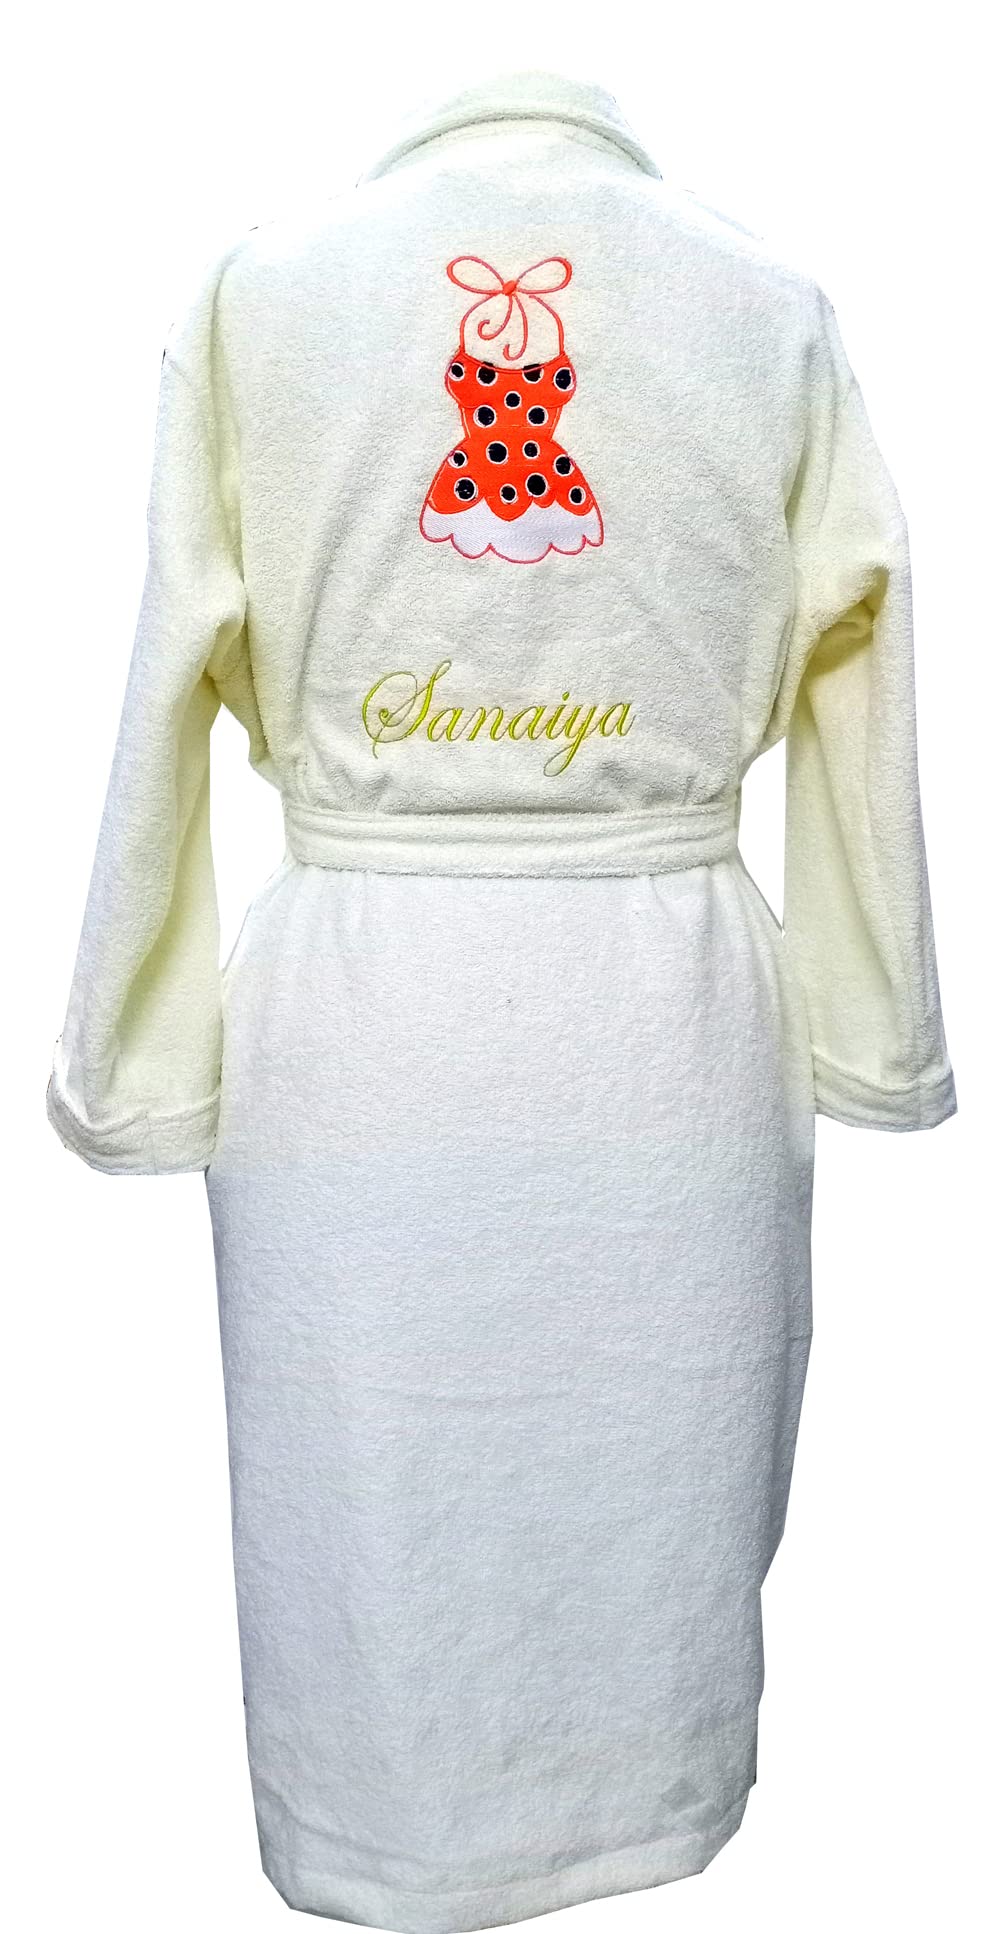 TurtleLittle, Cotton, Personalized Pink Heart Bathrobe for Teenager Girls with Name and Initials, 350 GSM (Set of 1, Ivory White)